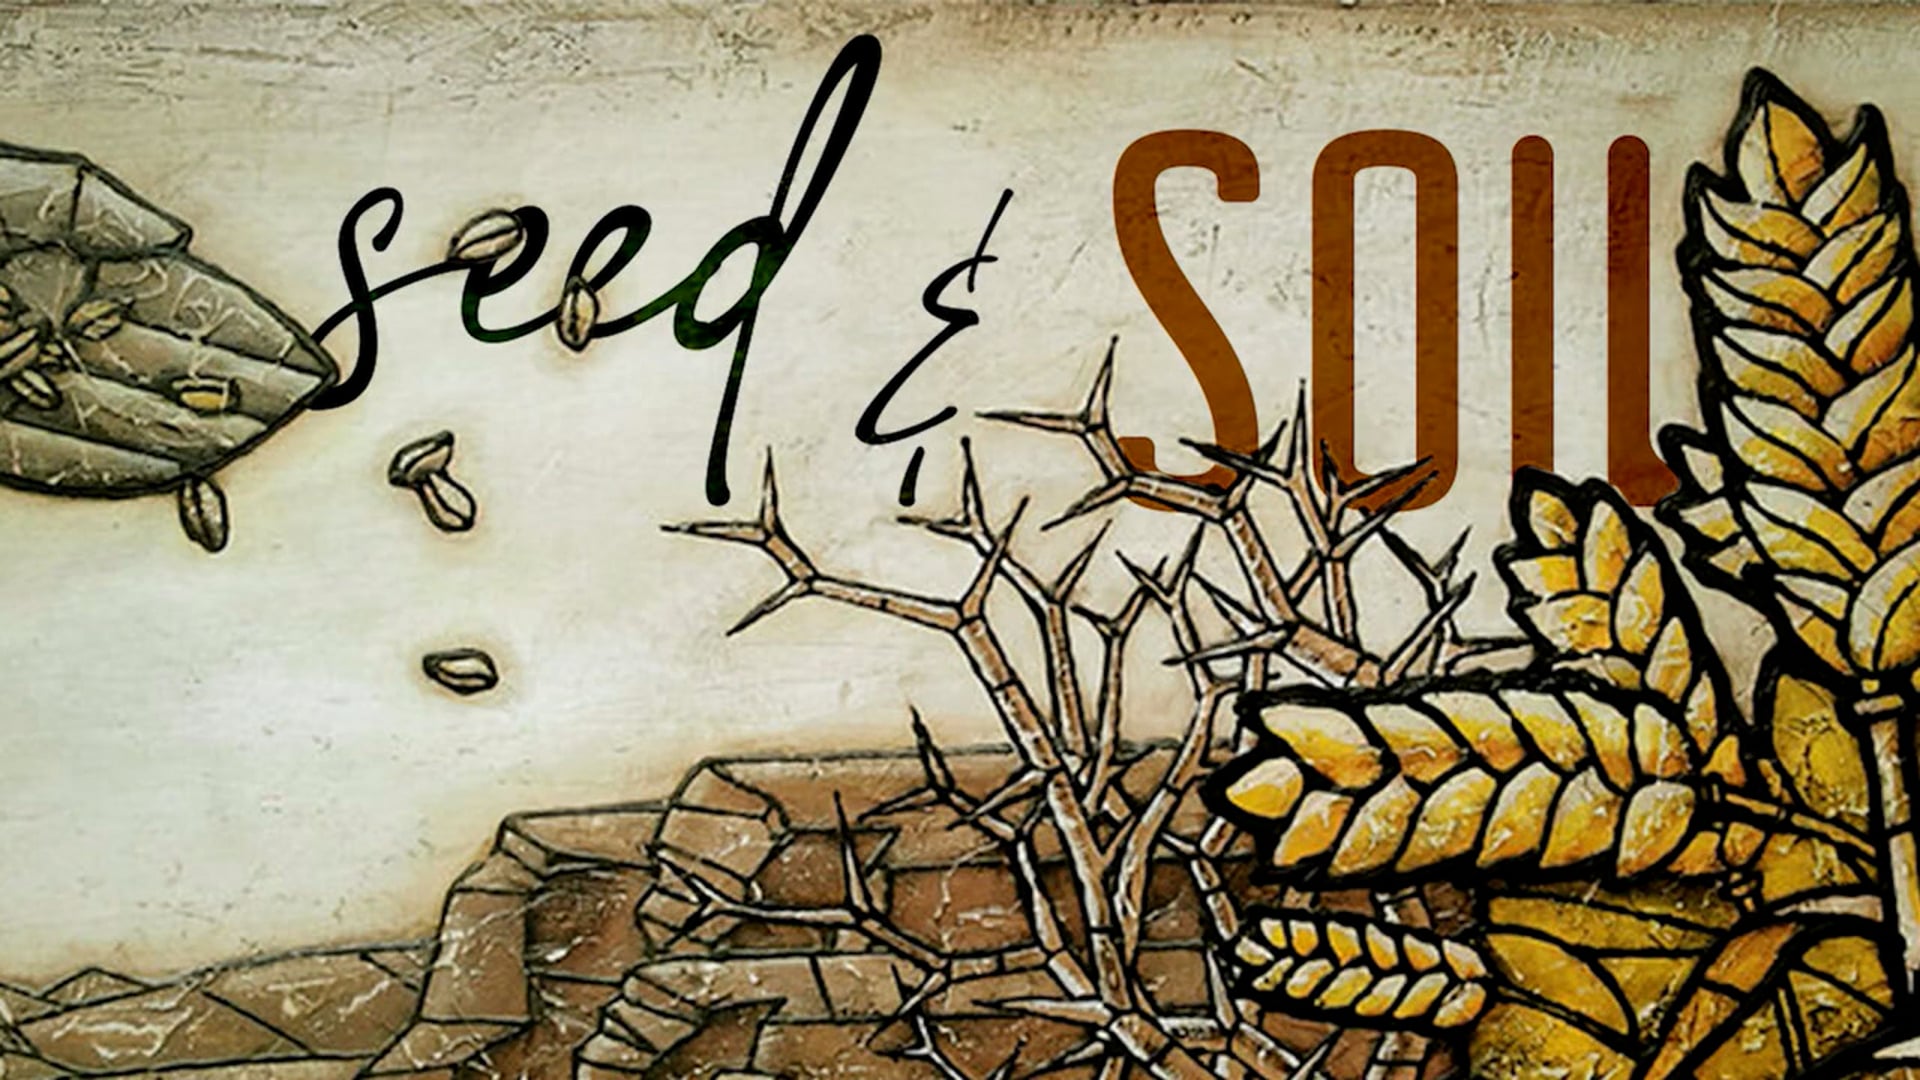 Seed and Soil 06 - Nov 14, 2021